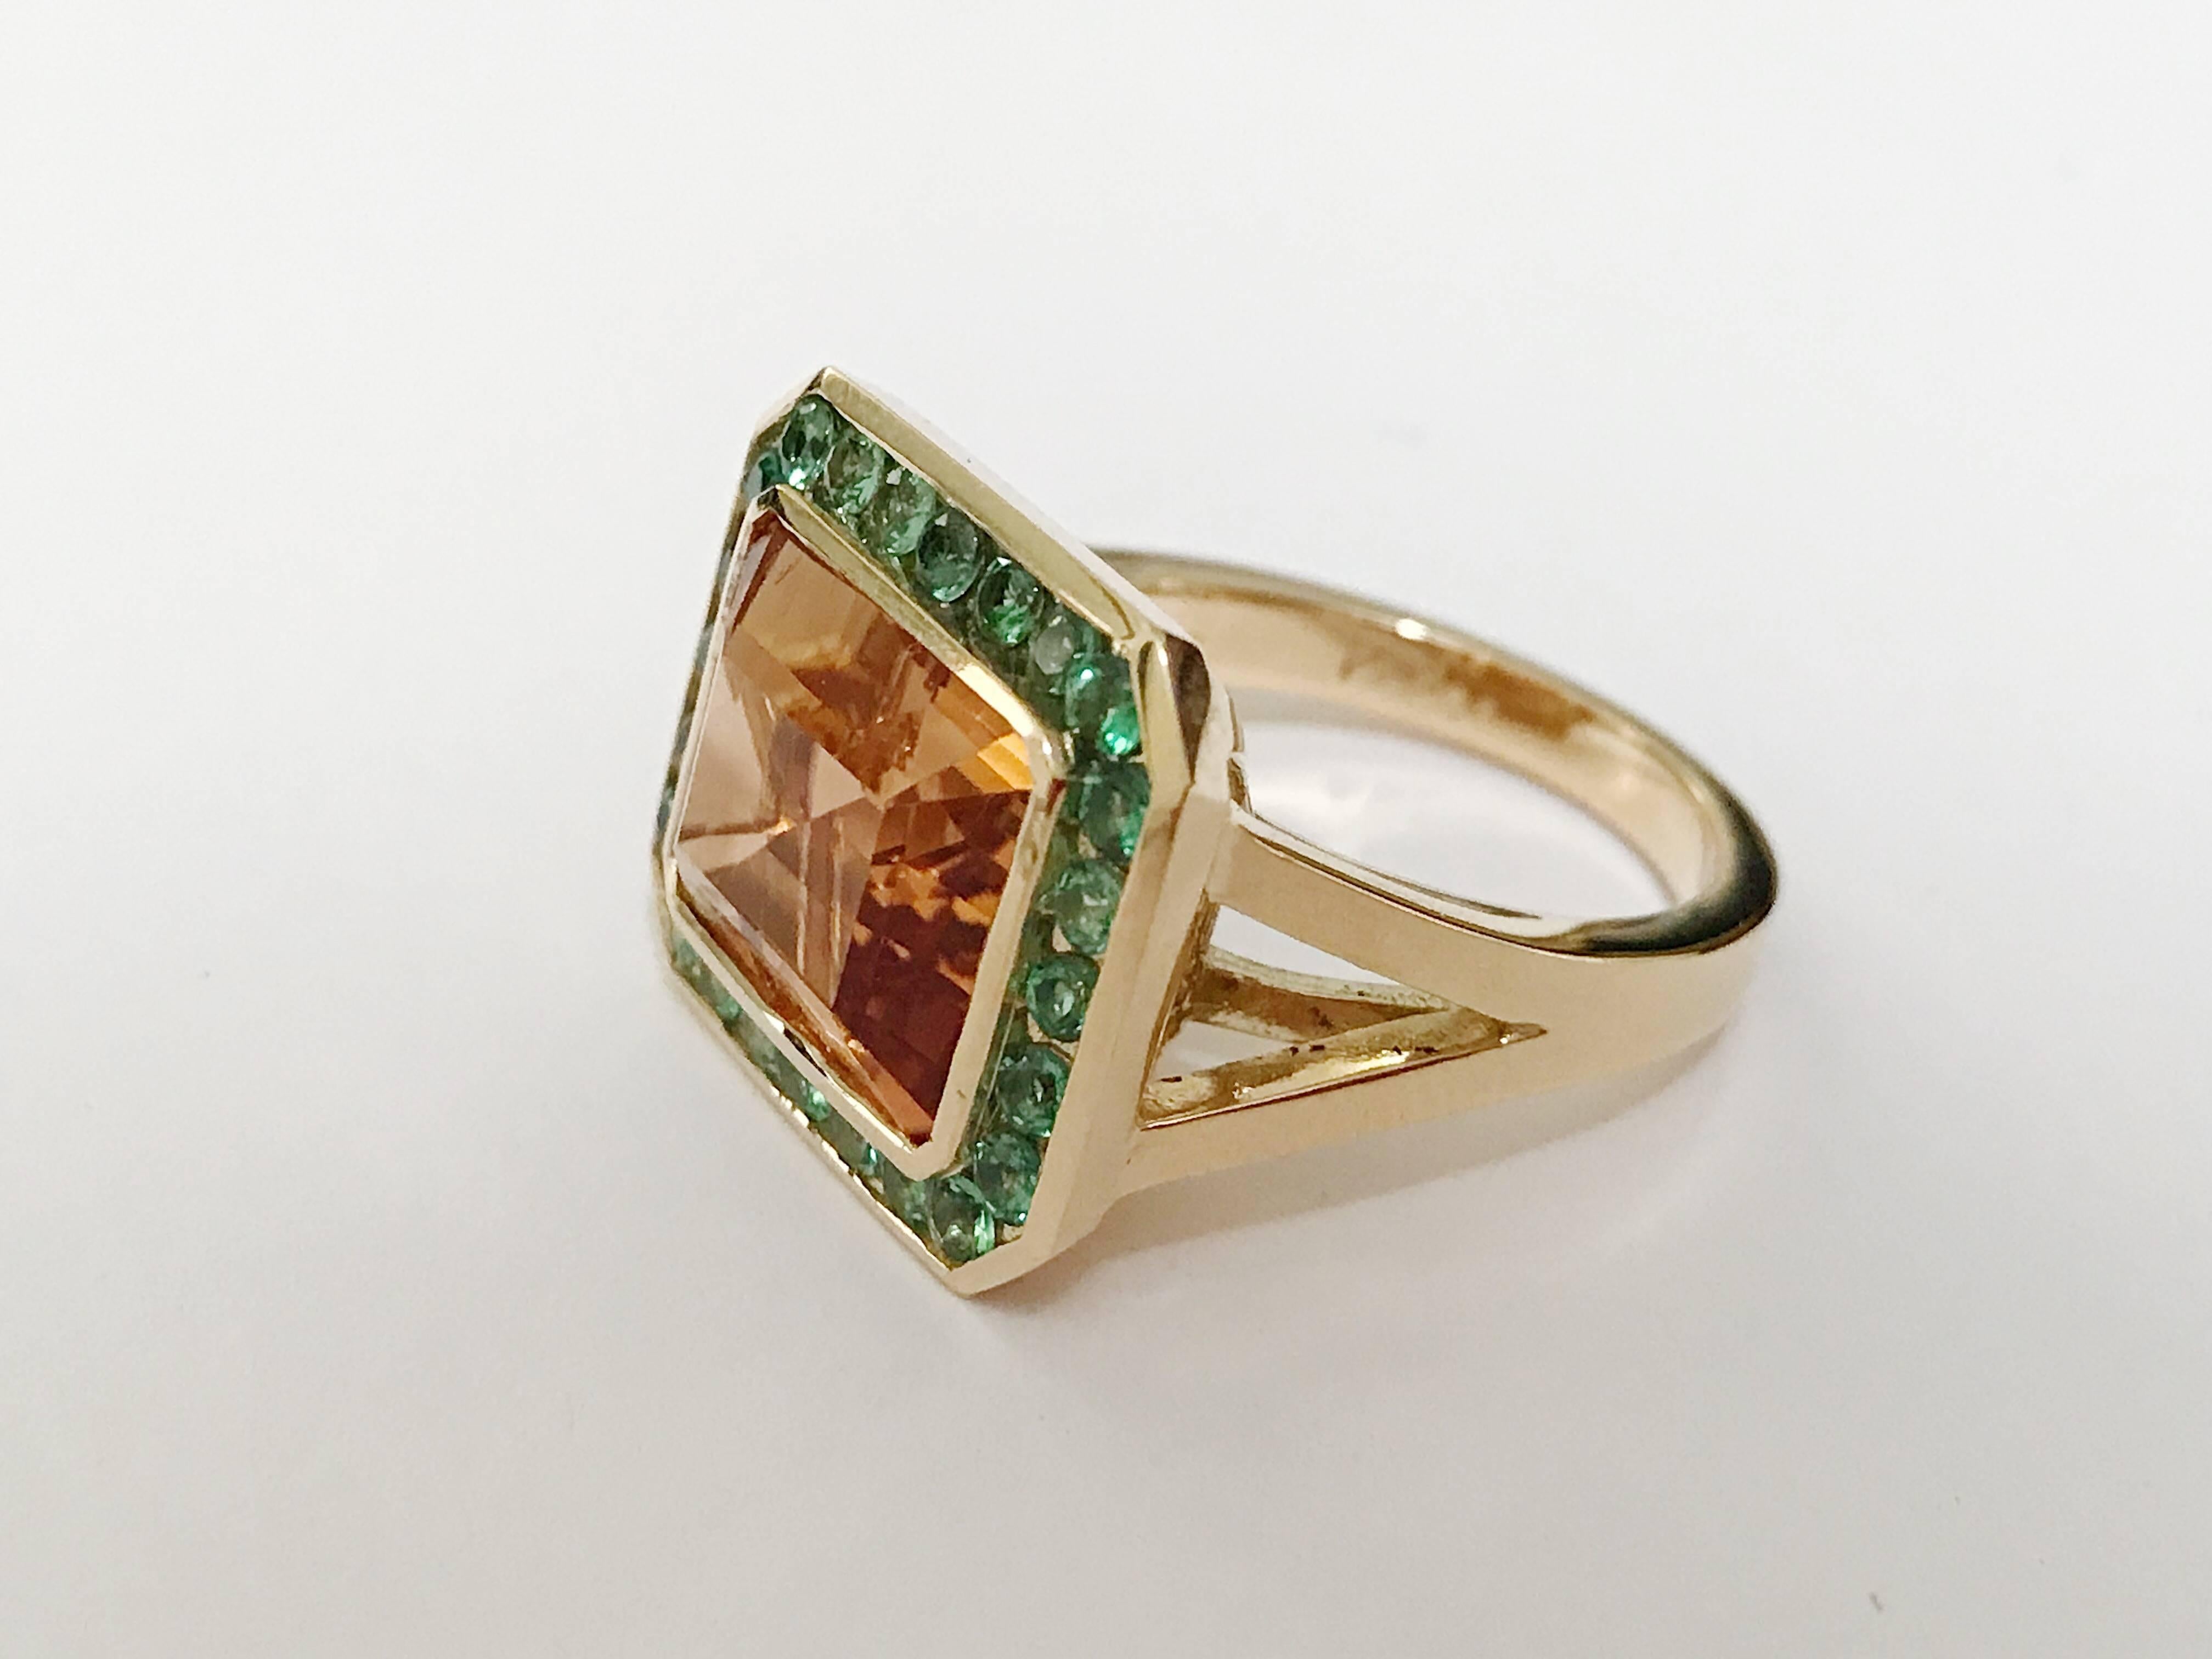 18kt Yellow Gold and Split Shank Ring with Emerald Cut Citrine Center Stone with surrounding Tsvaorite is an elegant cocktail ring. Measures 0.75 across the top.

This Ring can be made with any color center stone as well as type of surrounding